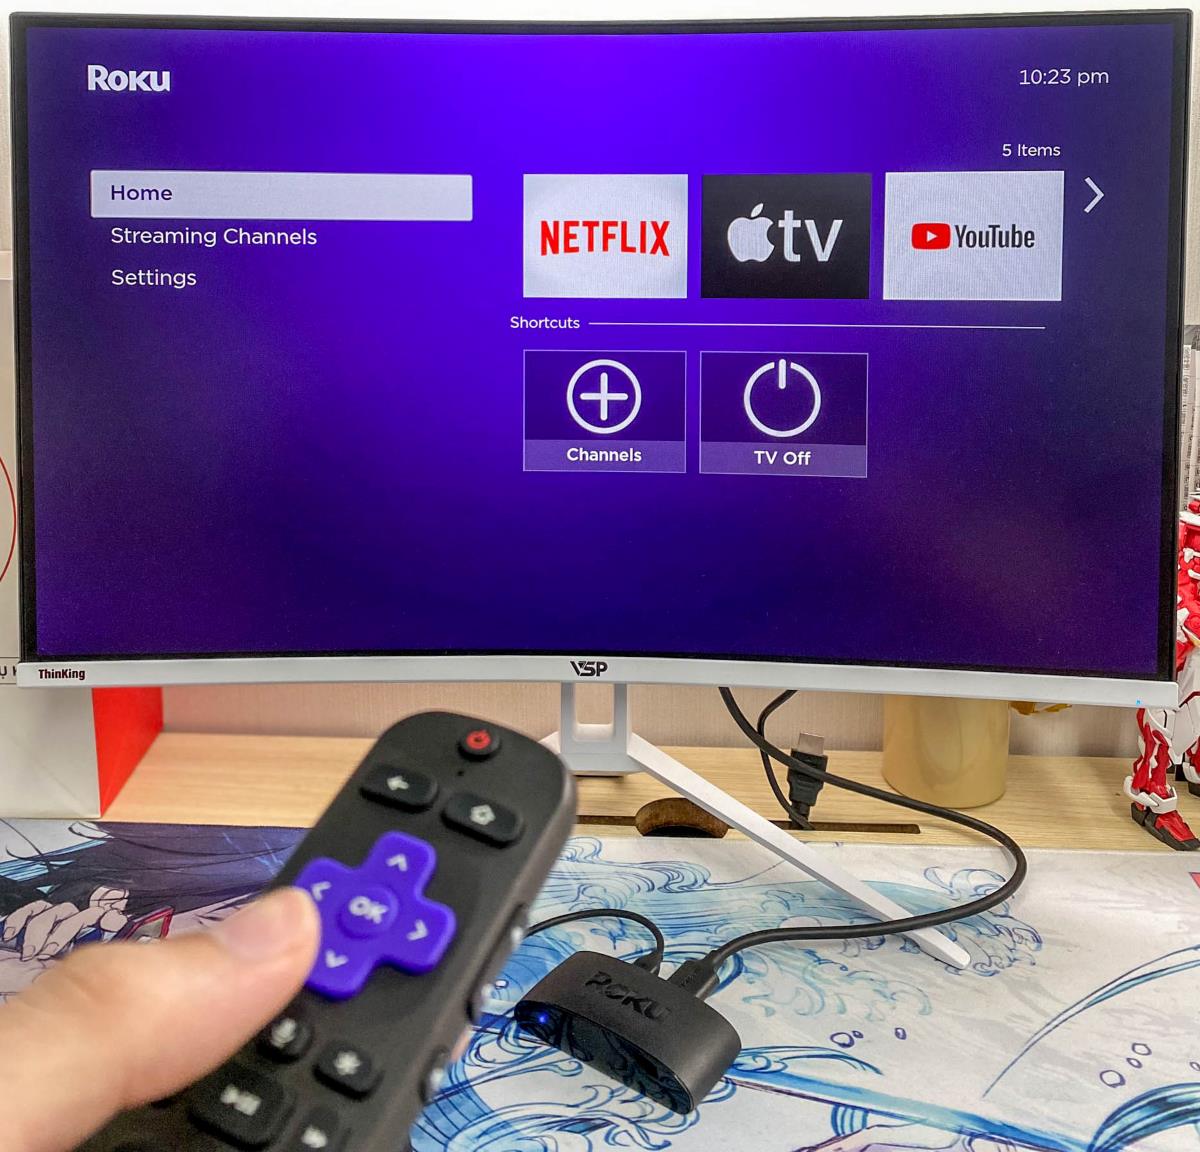 a hand is holding a Roku remote in front of a Roku screen on a monitor